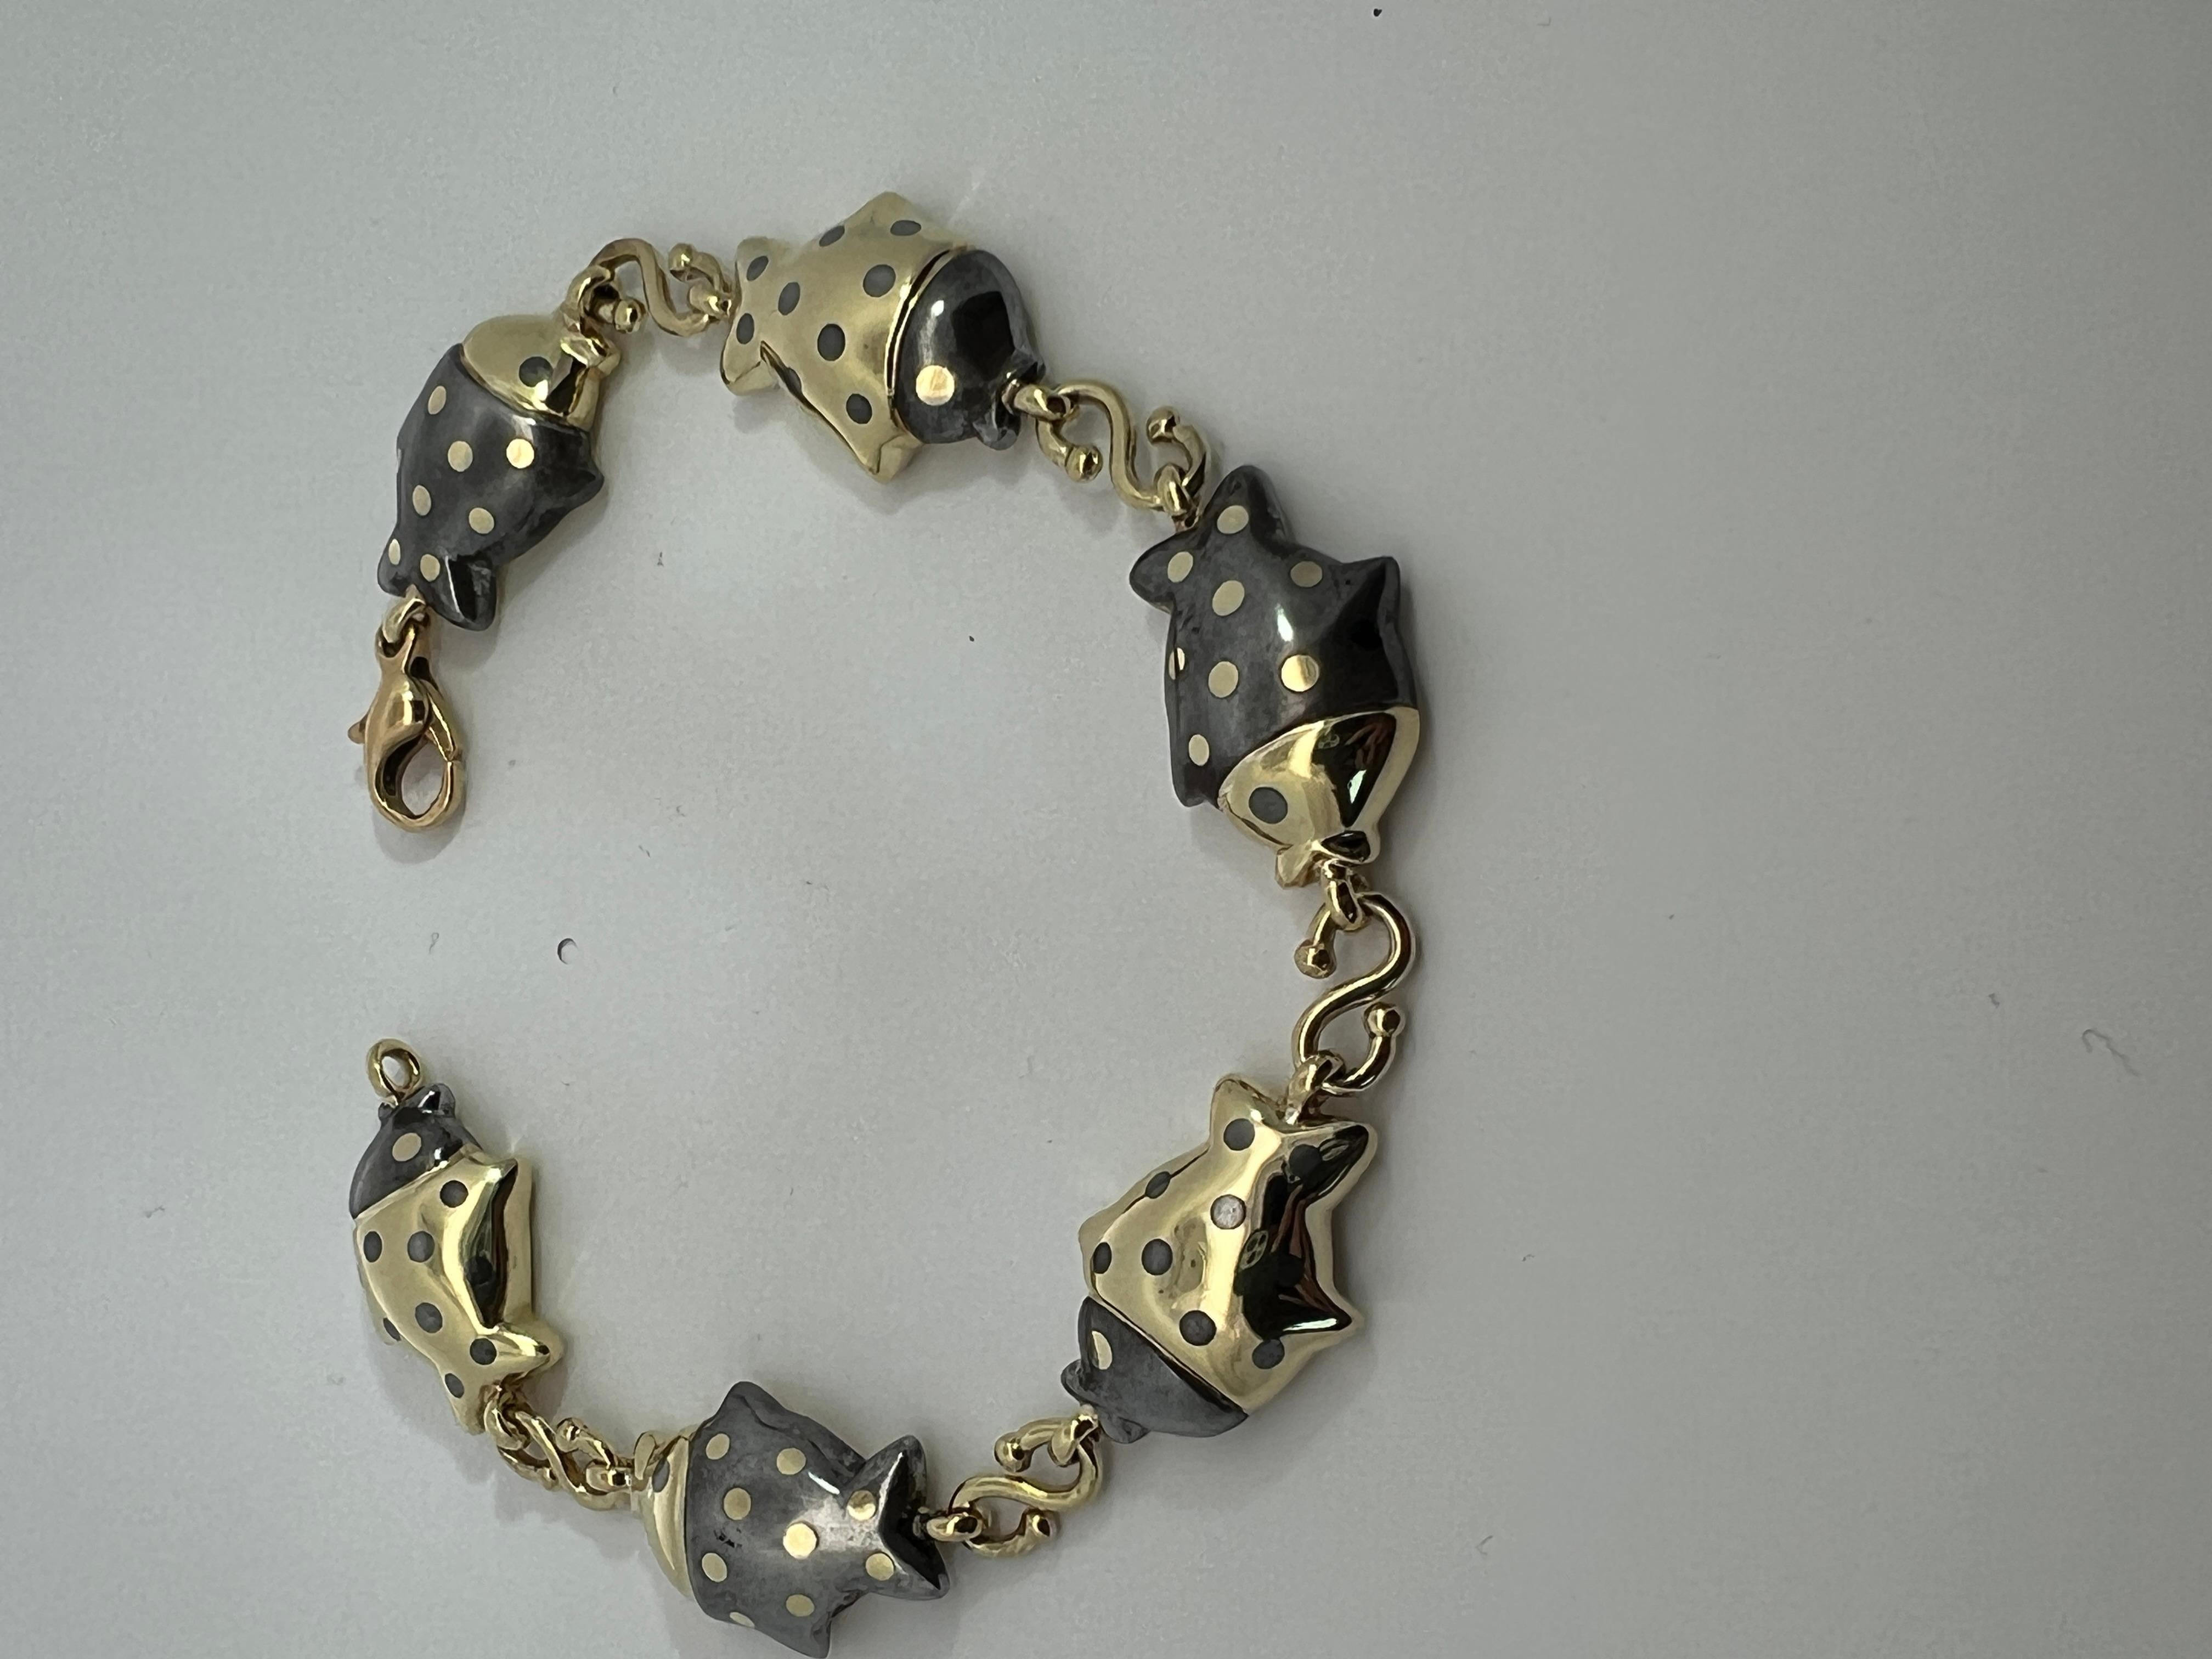 An 18k yellow gold and Hematite bracelet by Faraone / Tiffany & Co. For Sale 2